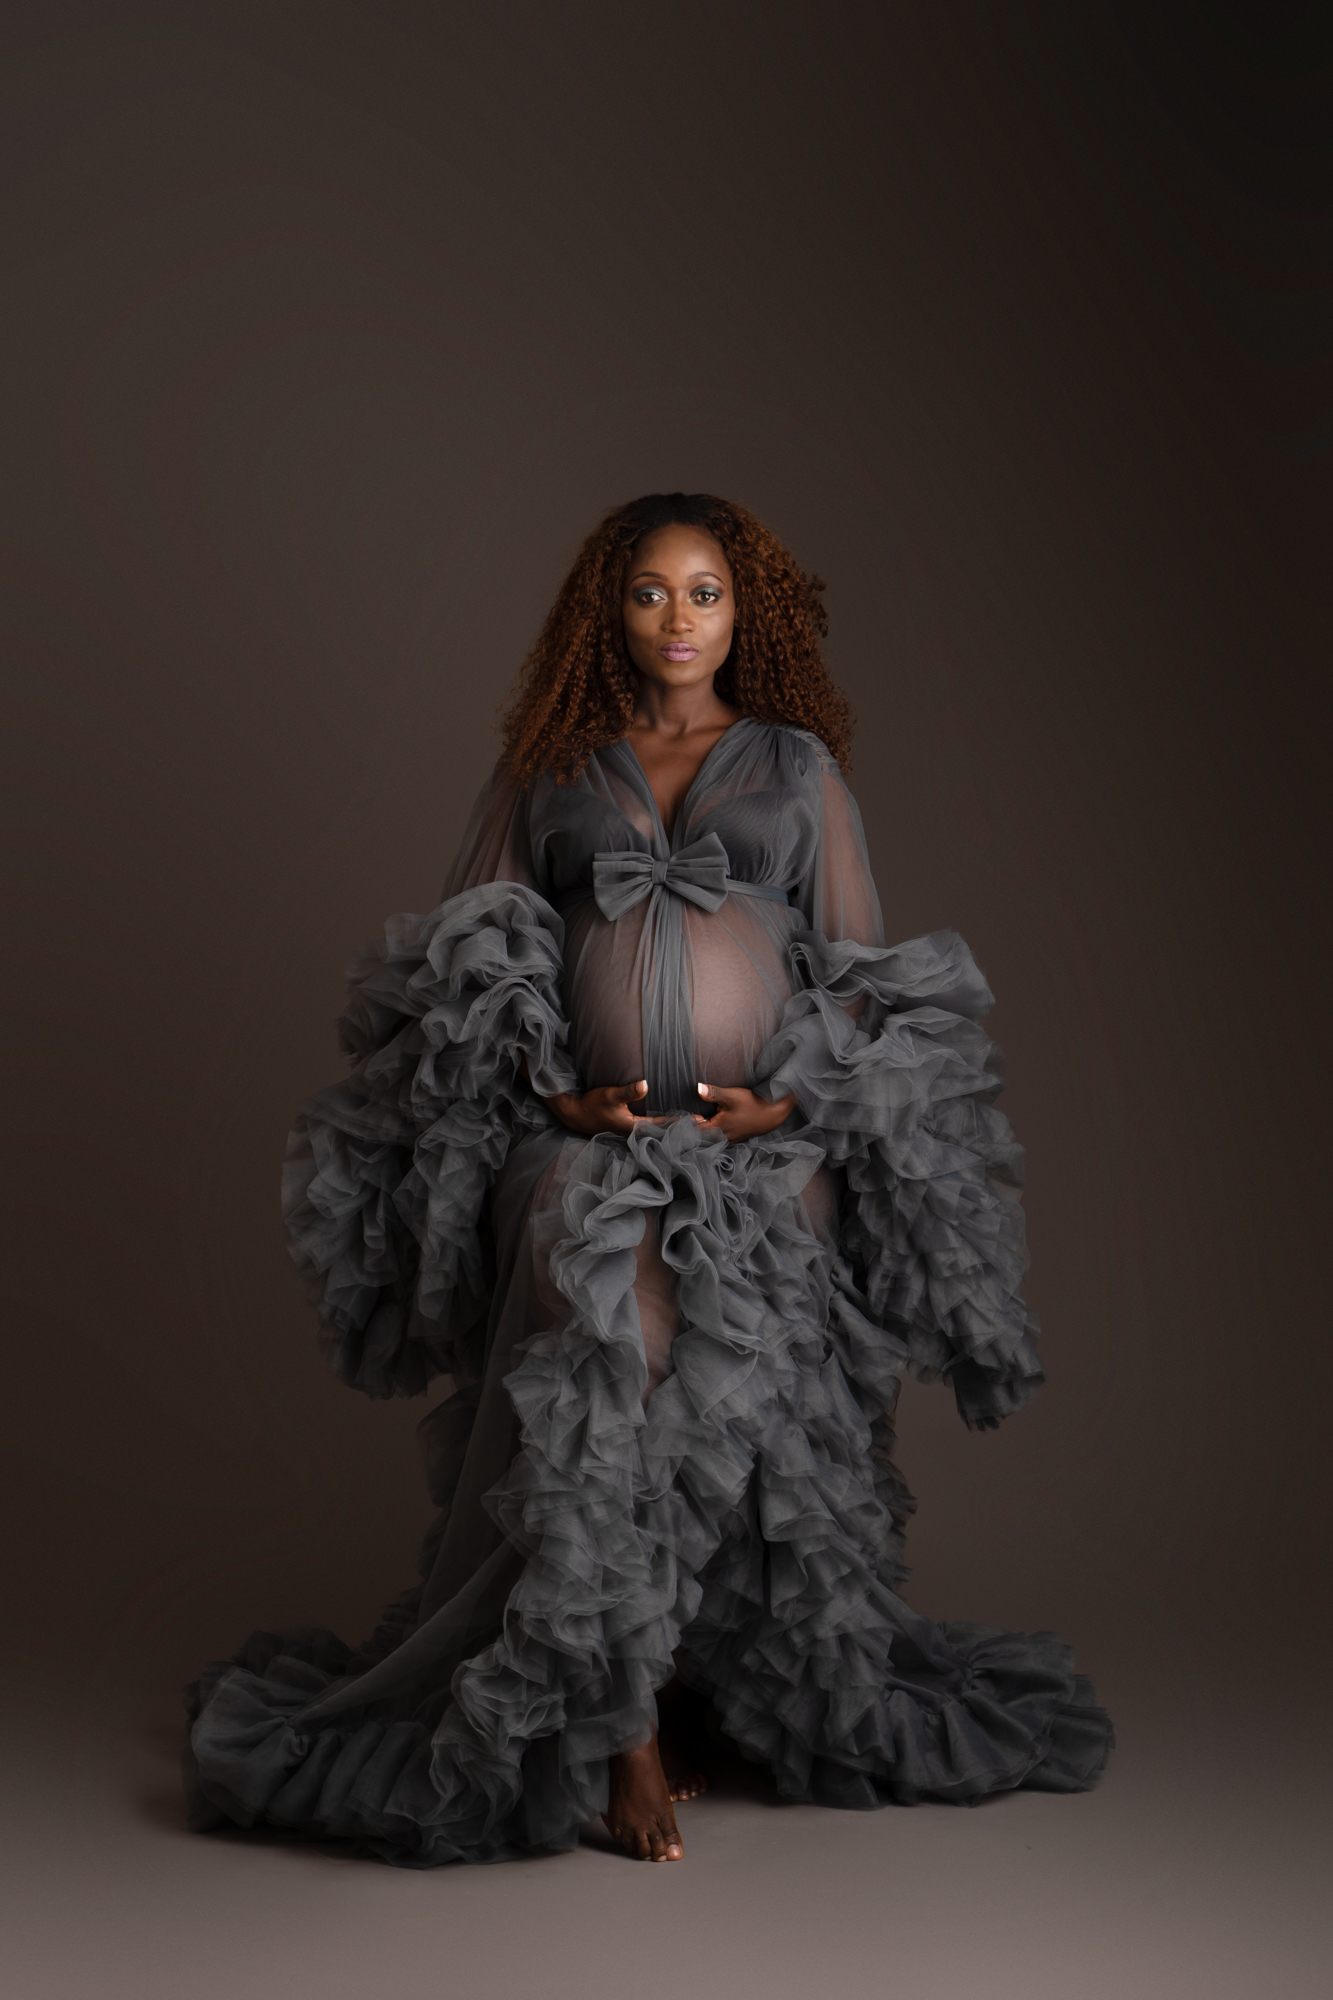 maternity photoshoot image of pregnant woman wearing a dramatic grey frilly maternity gown by edinburgh maternity photographer beautiful bairns photography